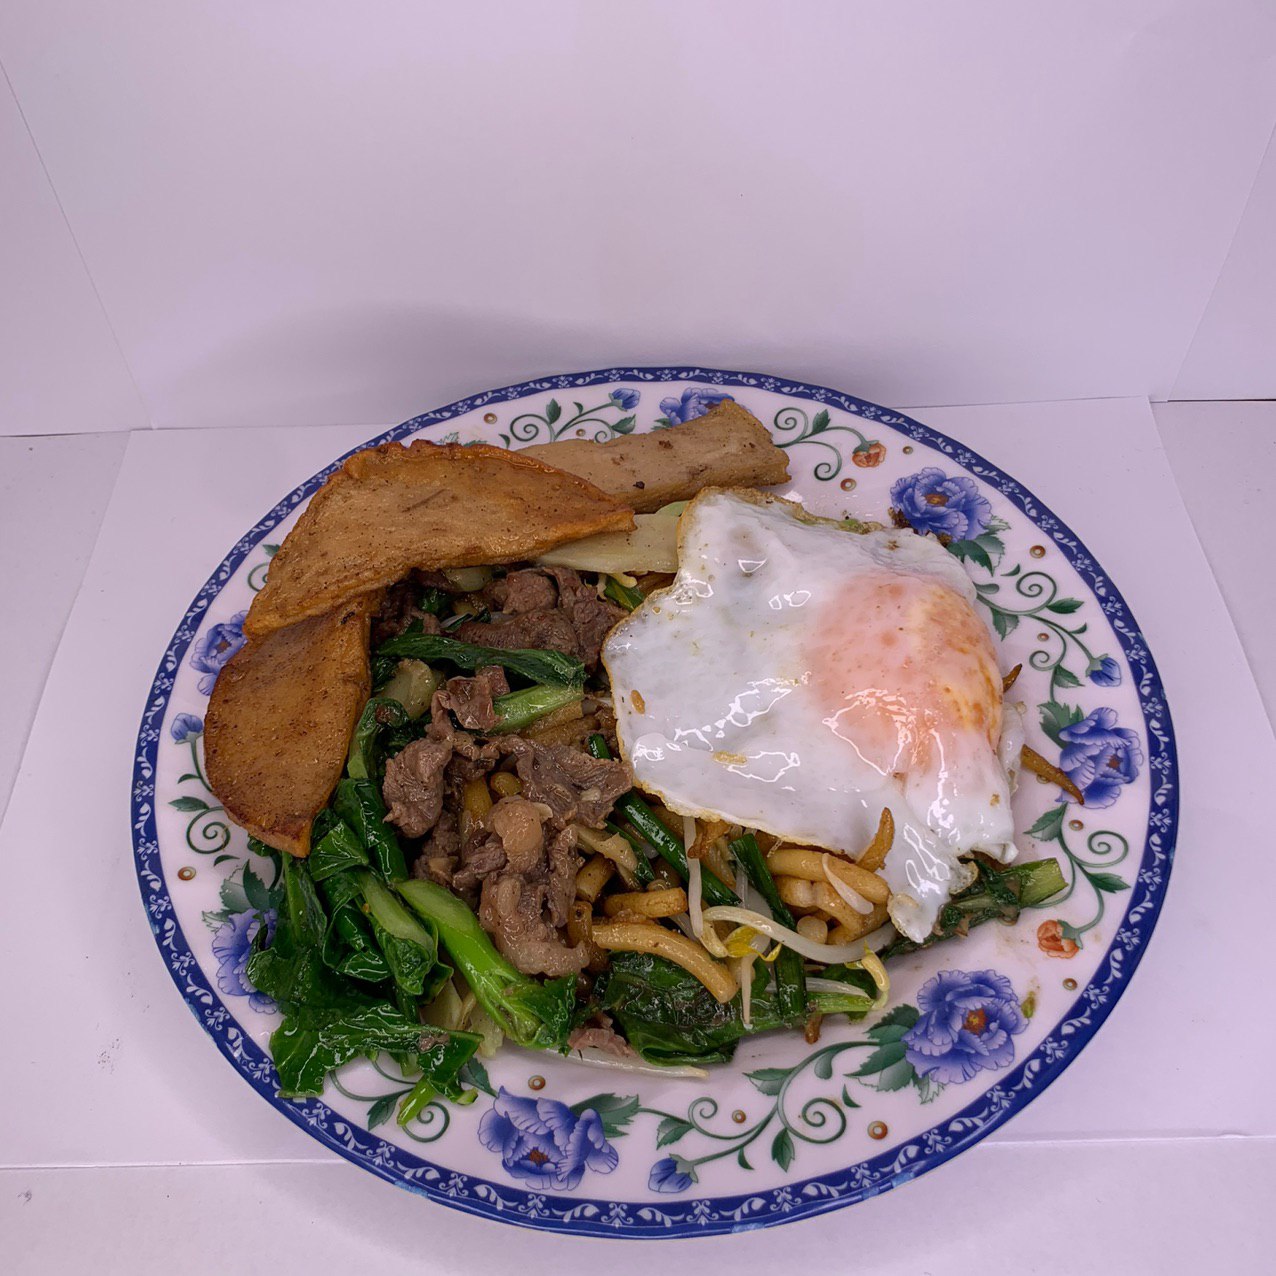 04.Lot Cha with Patte, Beef and Egg